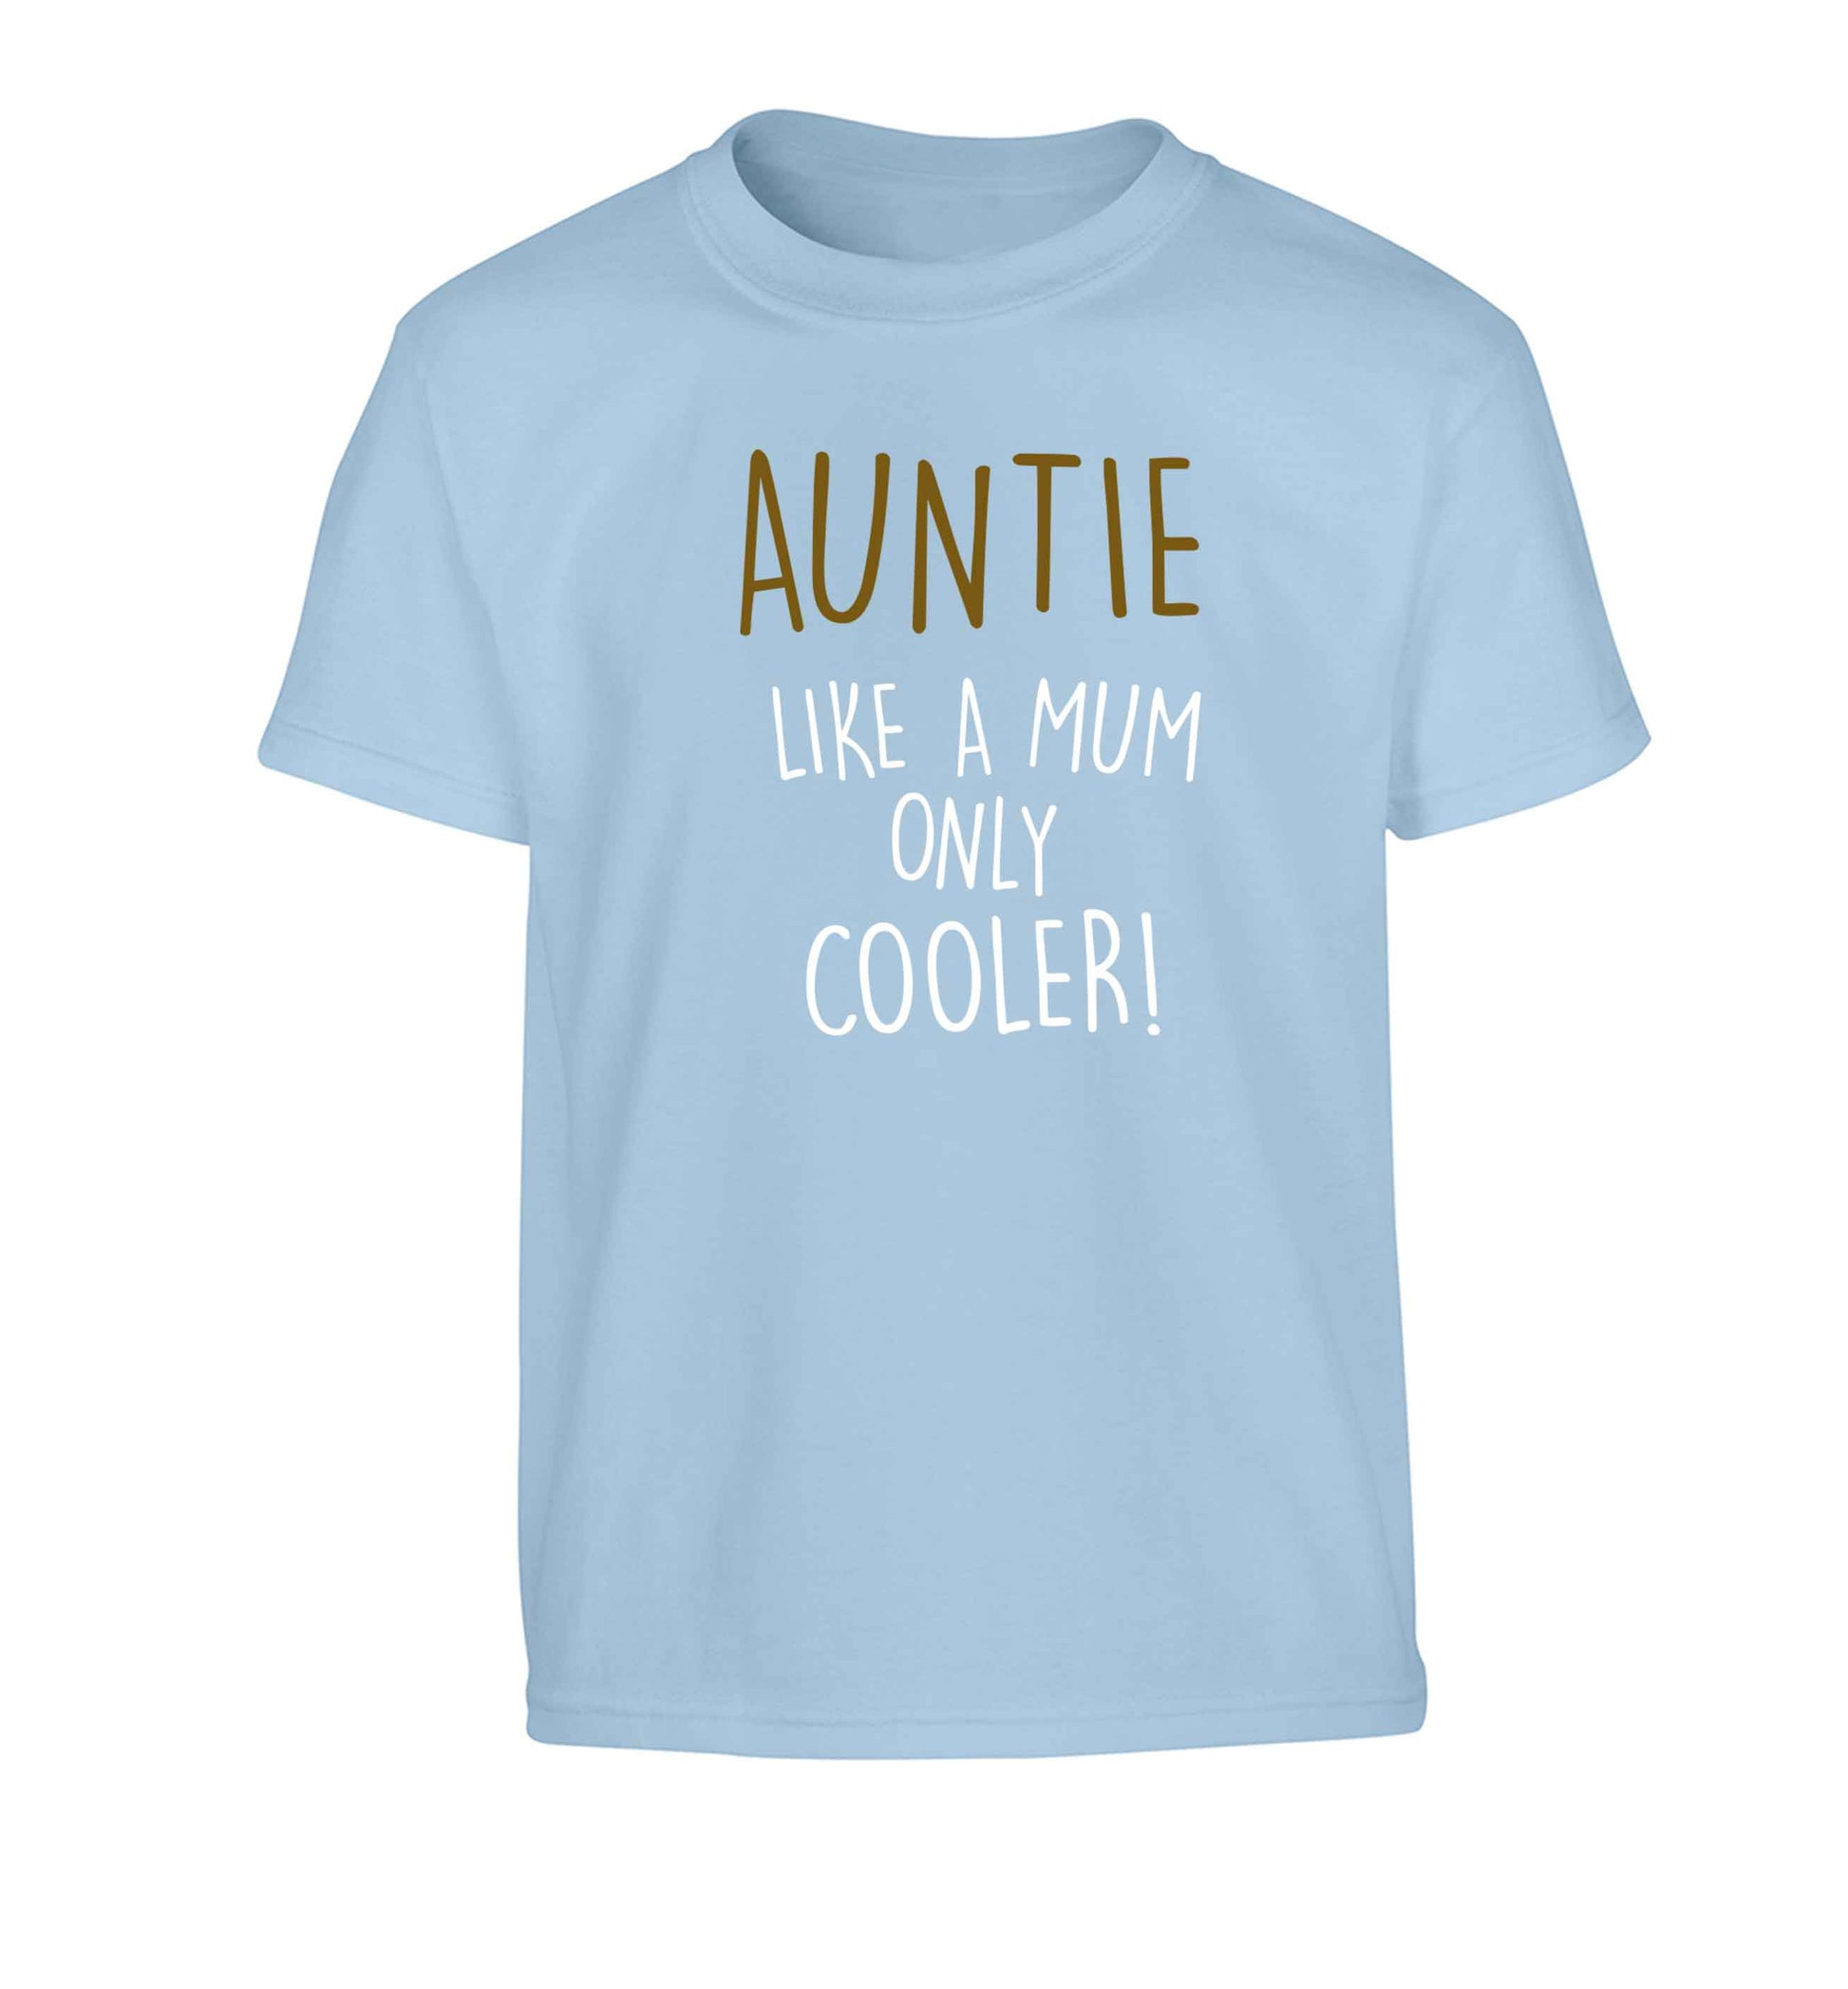 Auntie like a mum only cooler Children's light blue Tshirt 12-13 Years